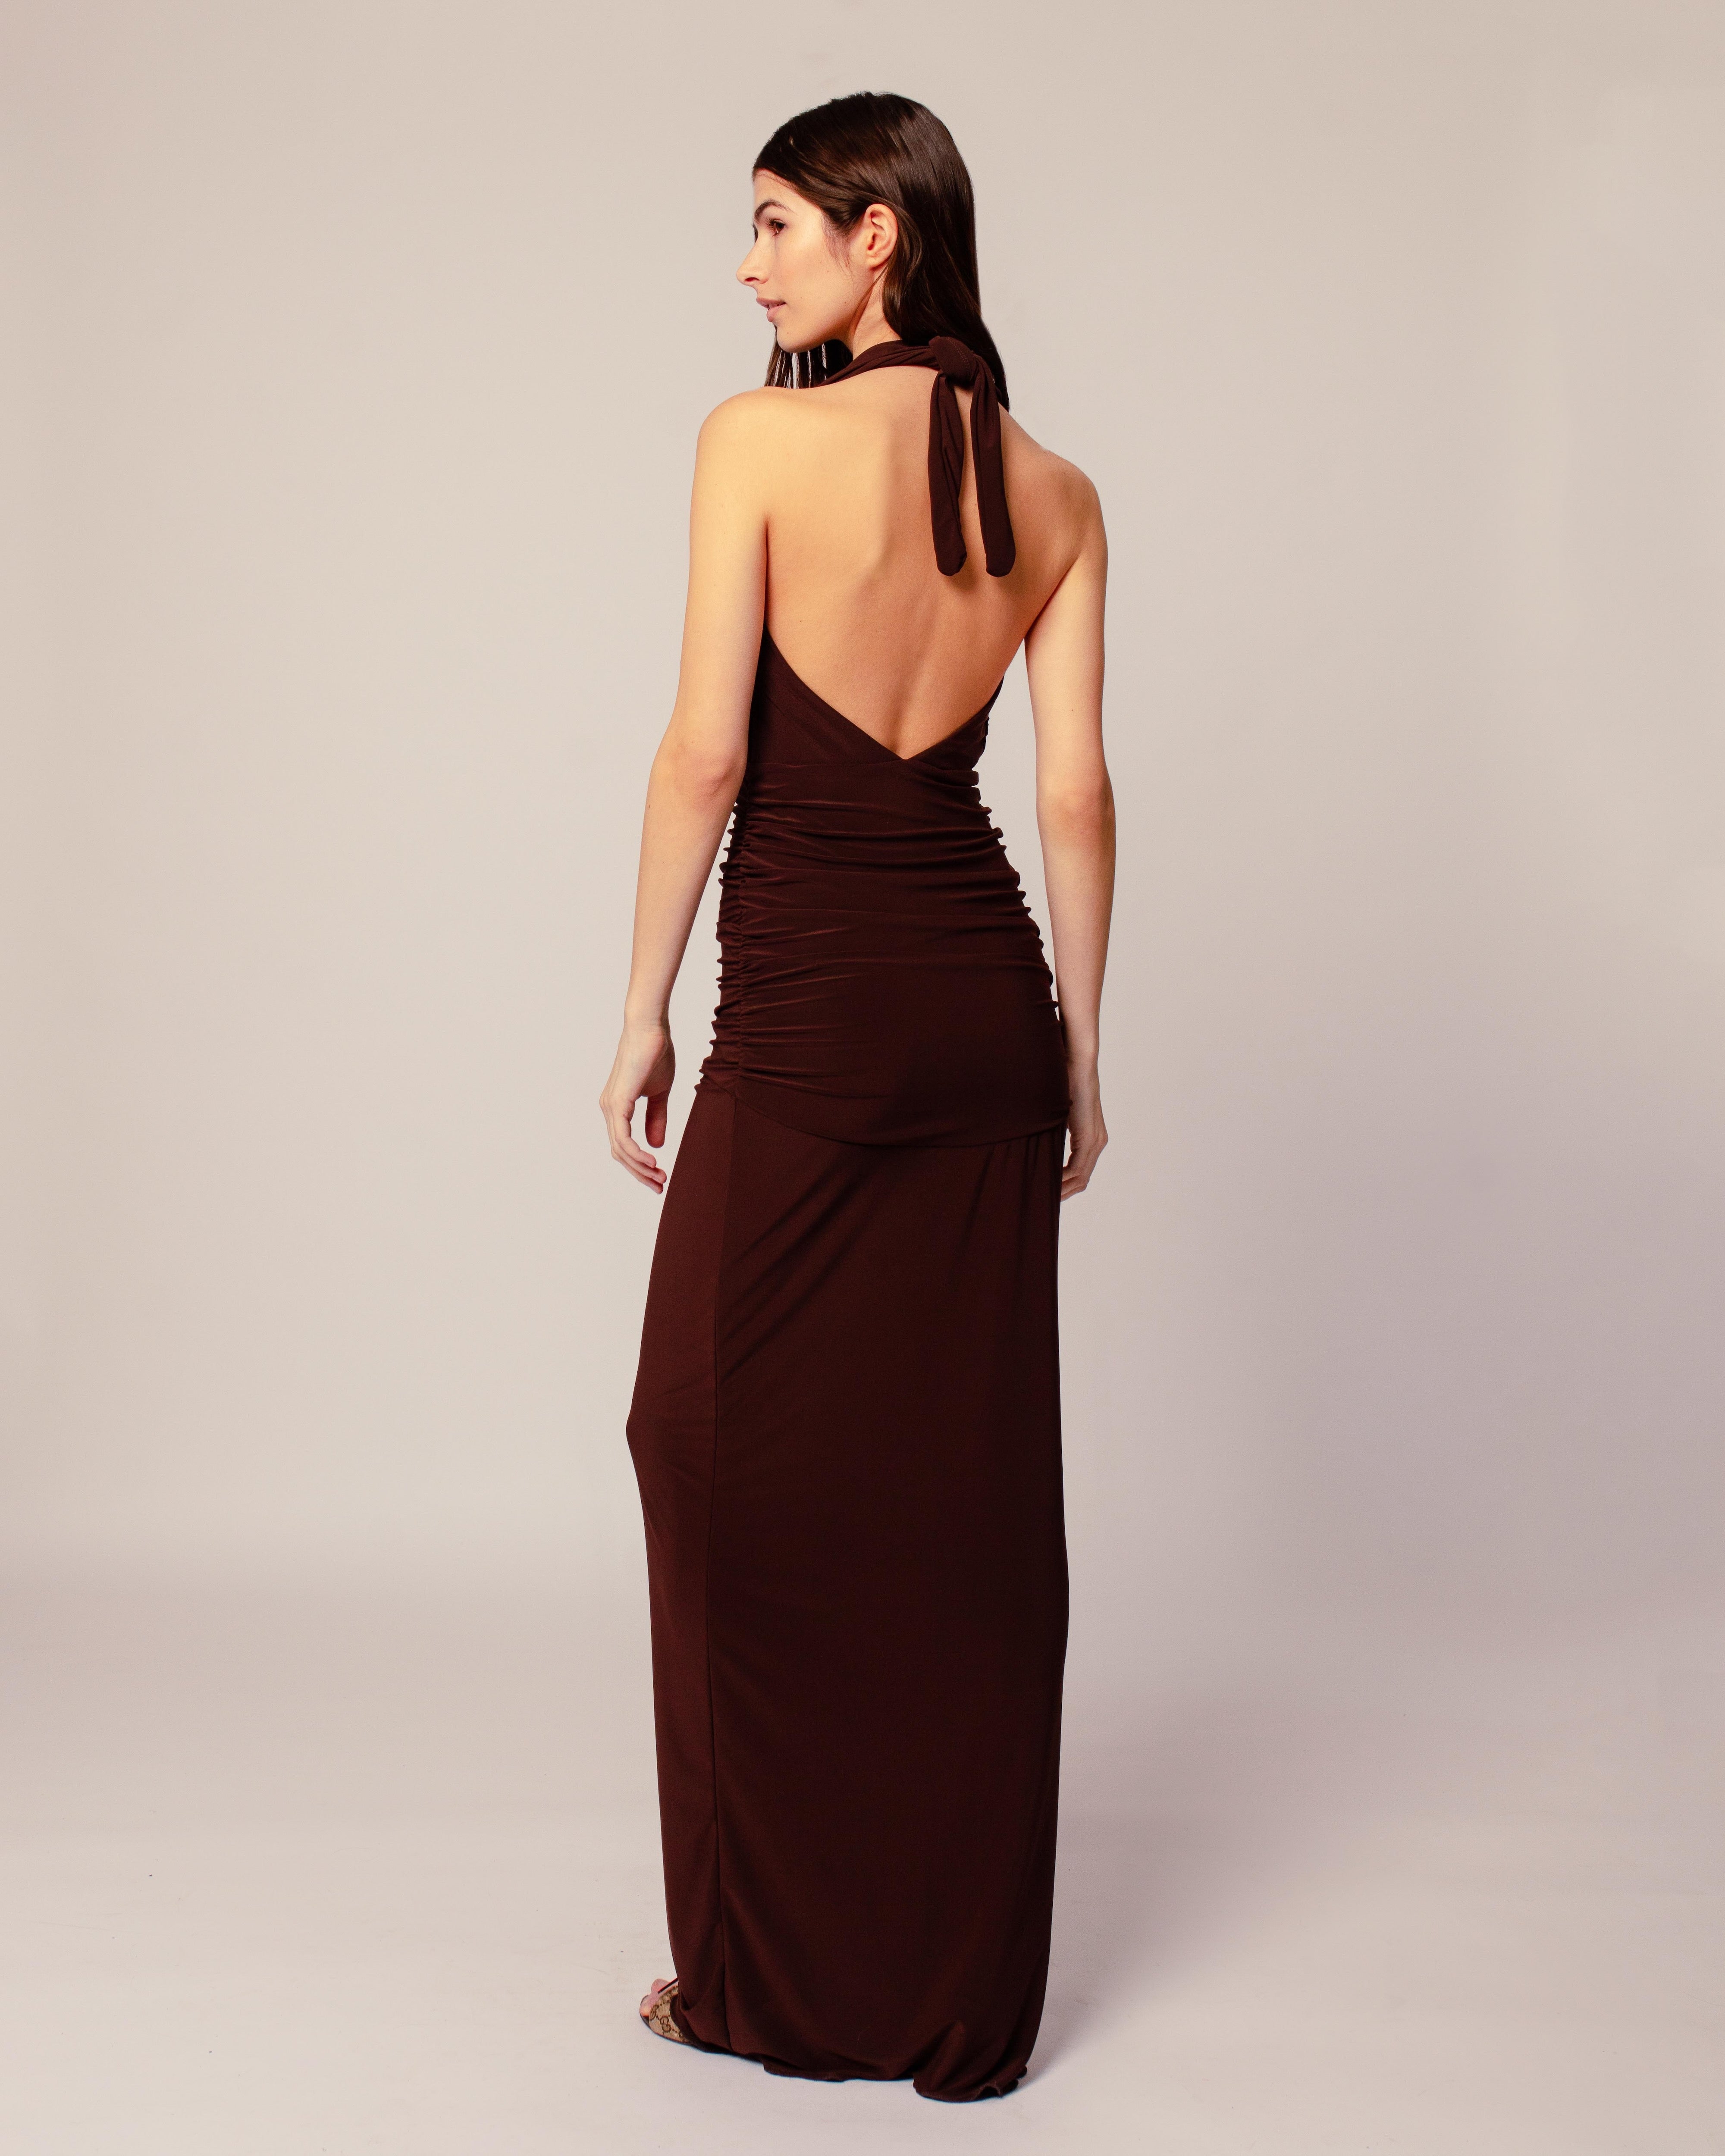 Halter Dress in Chocolate Brown